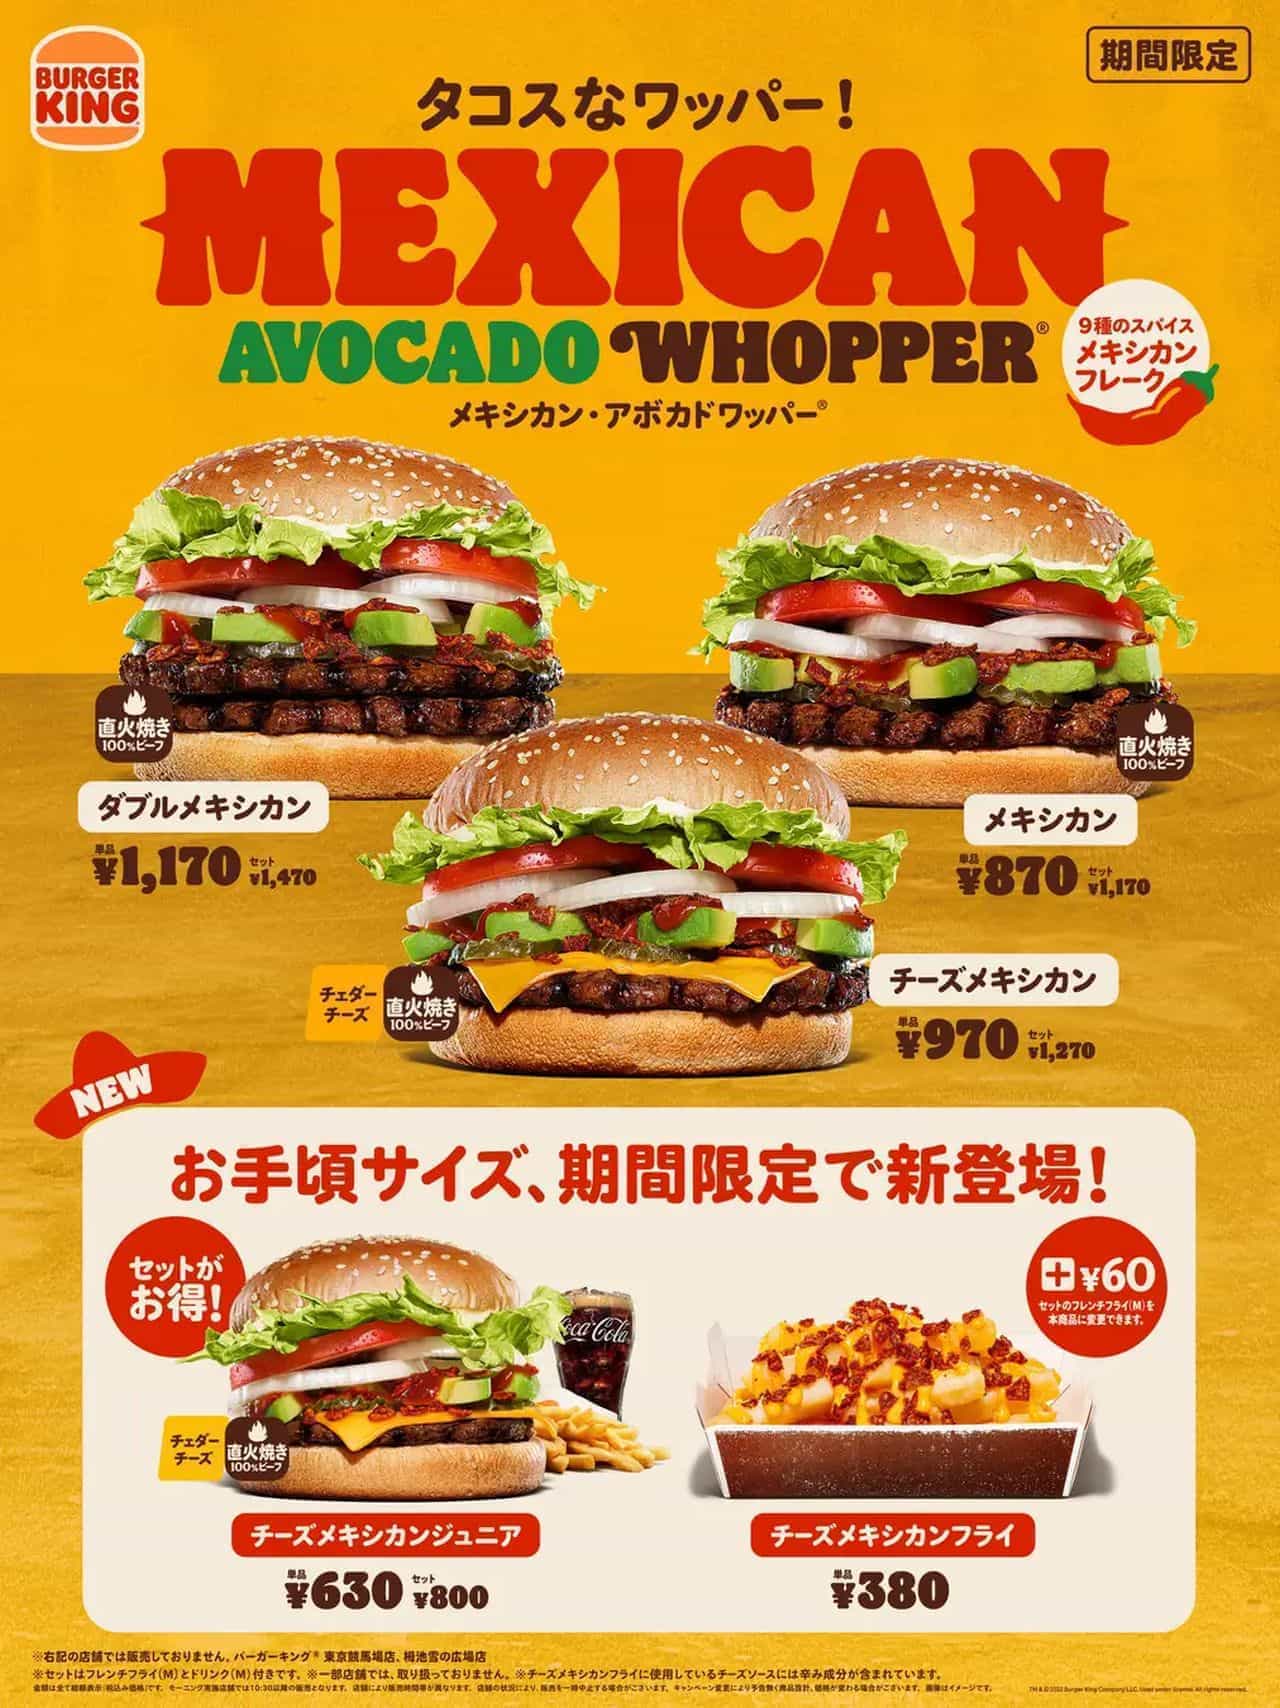 Burger King "Cheese Mexican Avocado Whopper Jr." and "Cheese Mexican Fries"